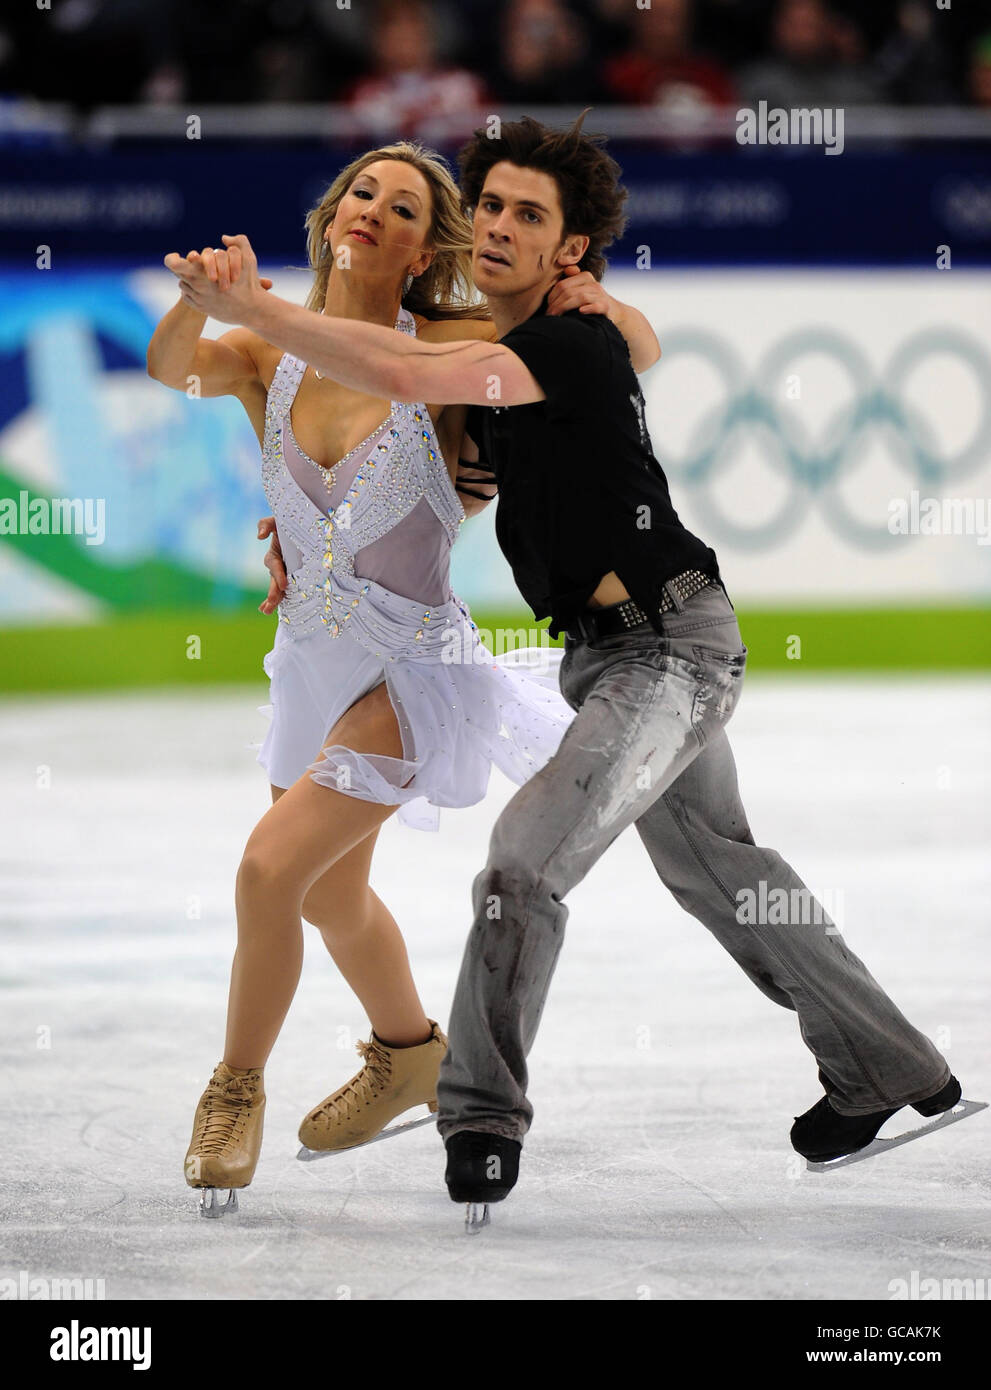 Great Britain's Sinead and John Kerr in action during their Free Dance in the Figure Skating Ice Dance during the 2010 Winter Olympics at the Pacific Coliseum, Vancouver, Canada. Stock Photo